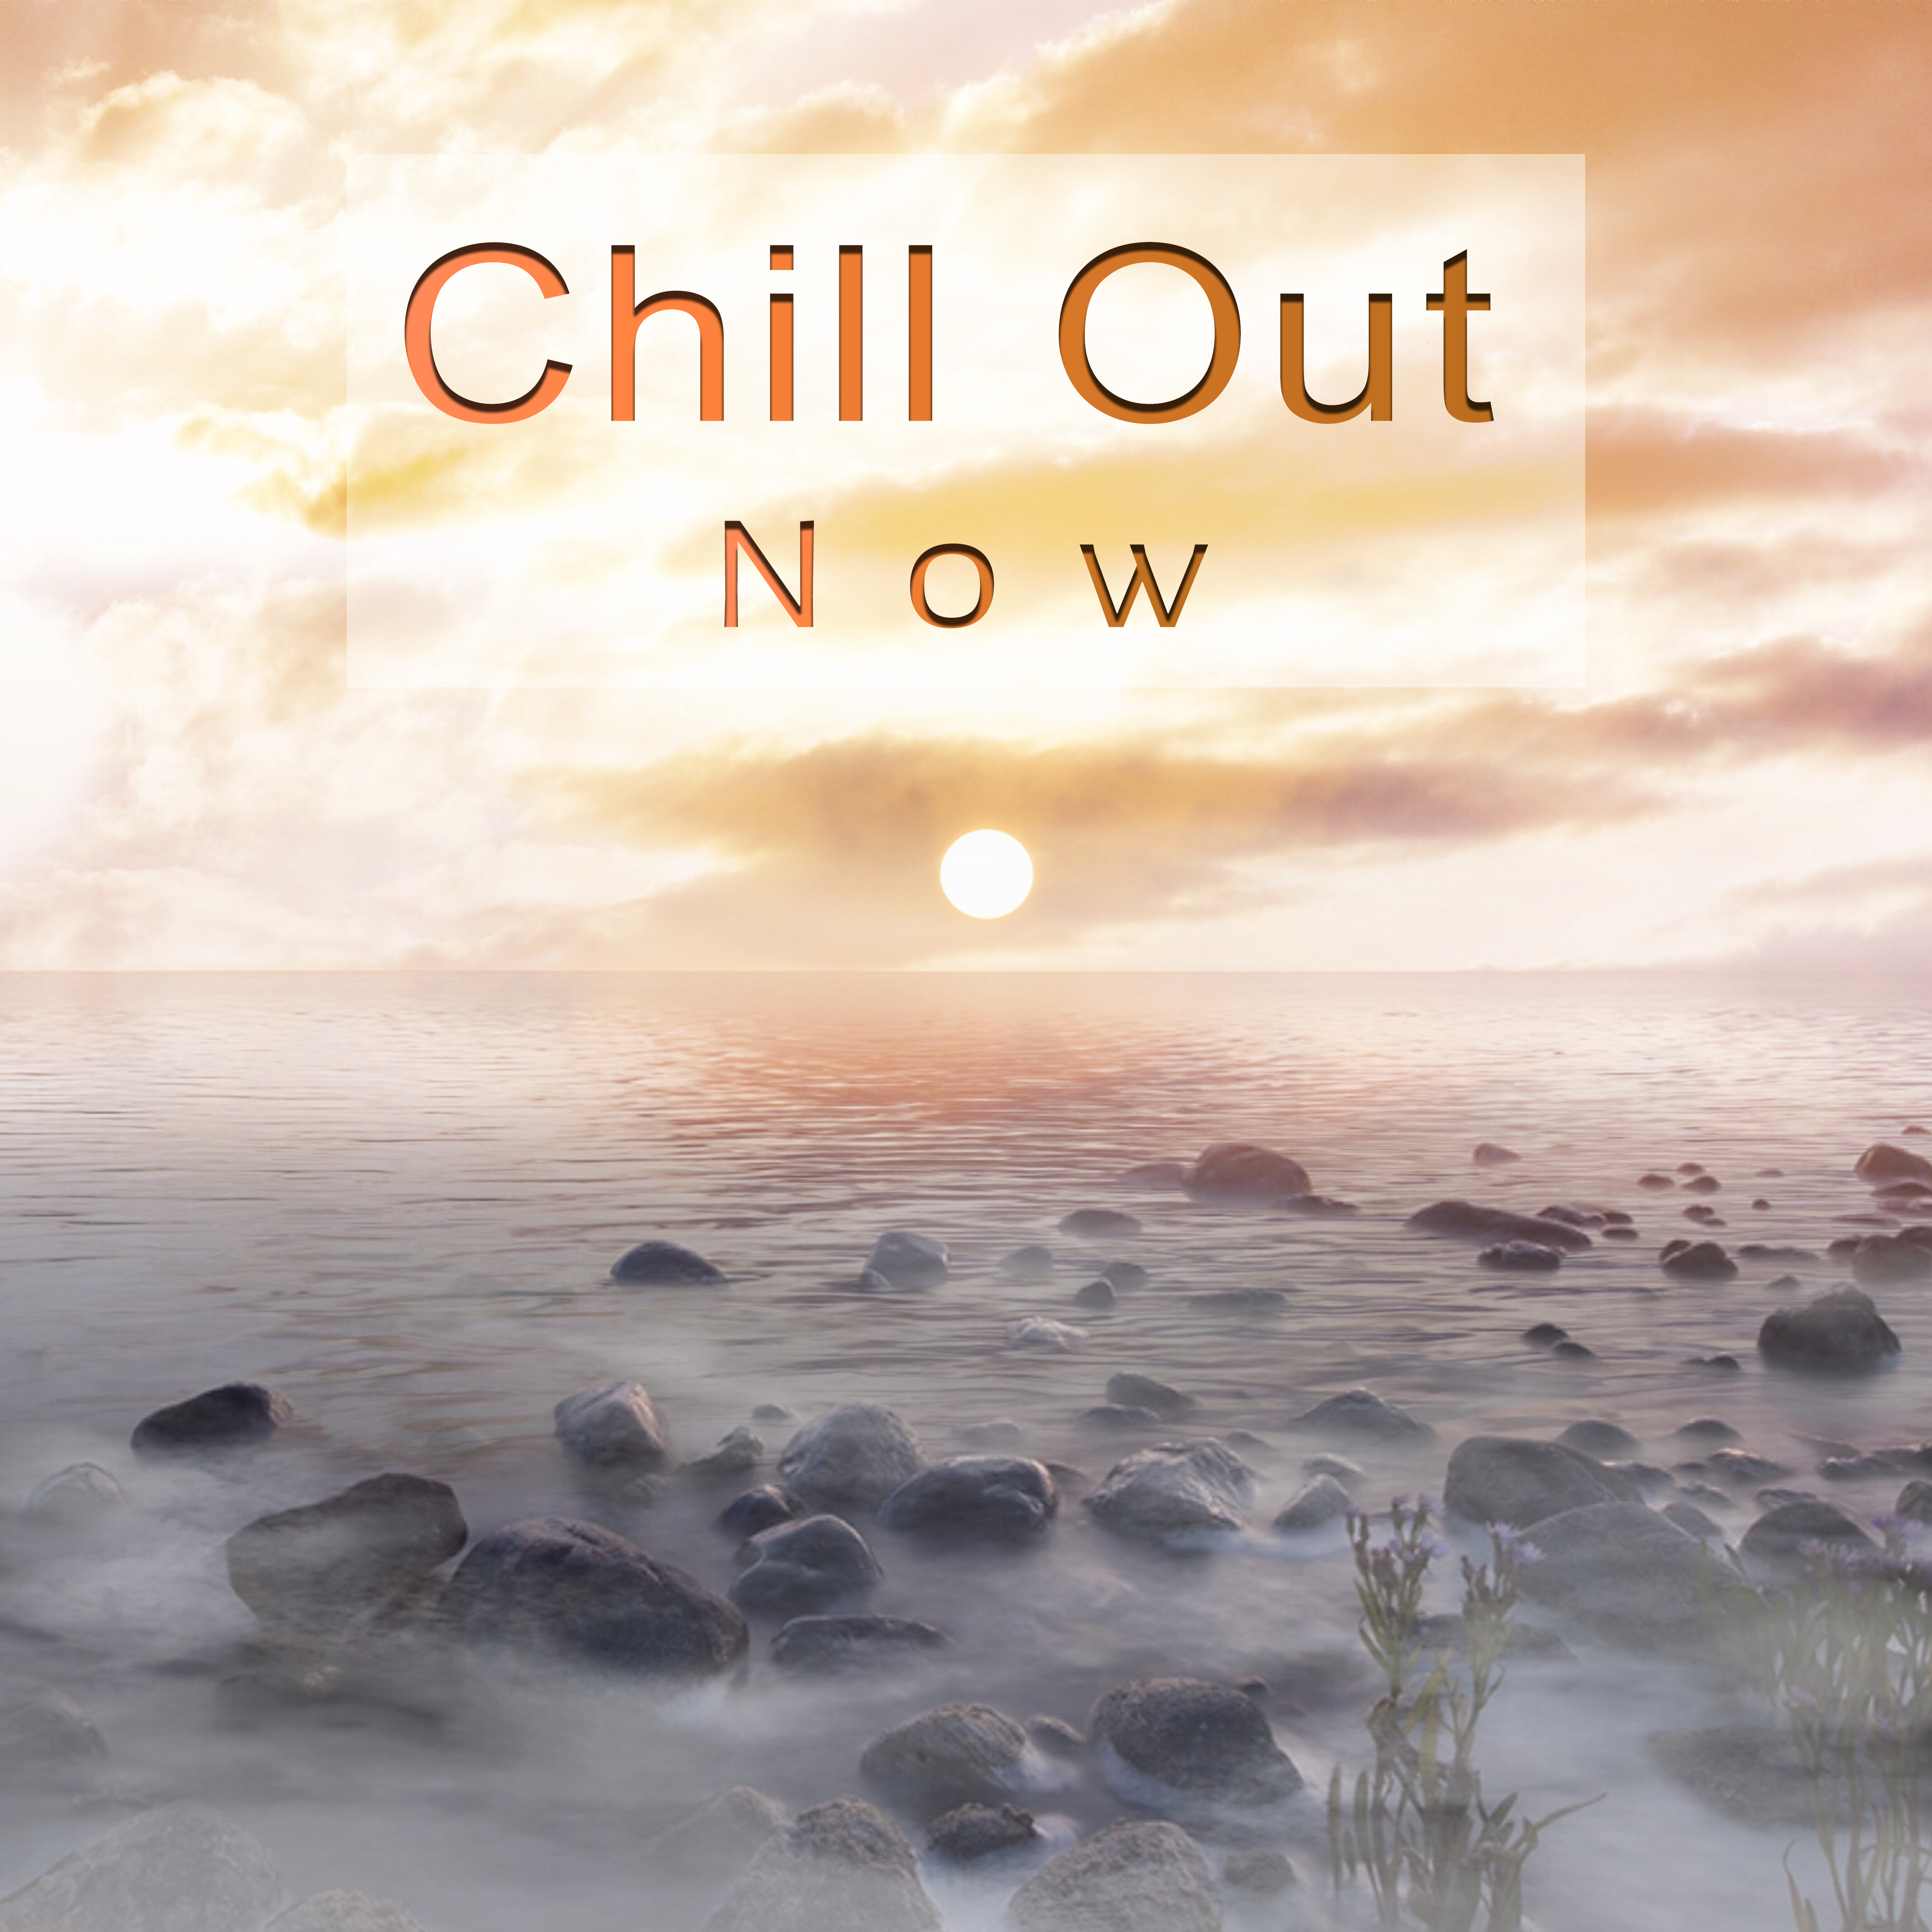 Chill Out Now – Summertime 2017, Bahama Chill, Beach Party, Hot Vibes 69, Relax, Ibiza Lounge